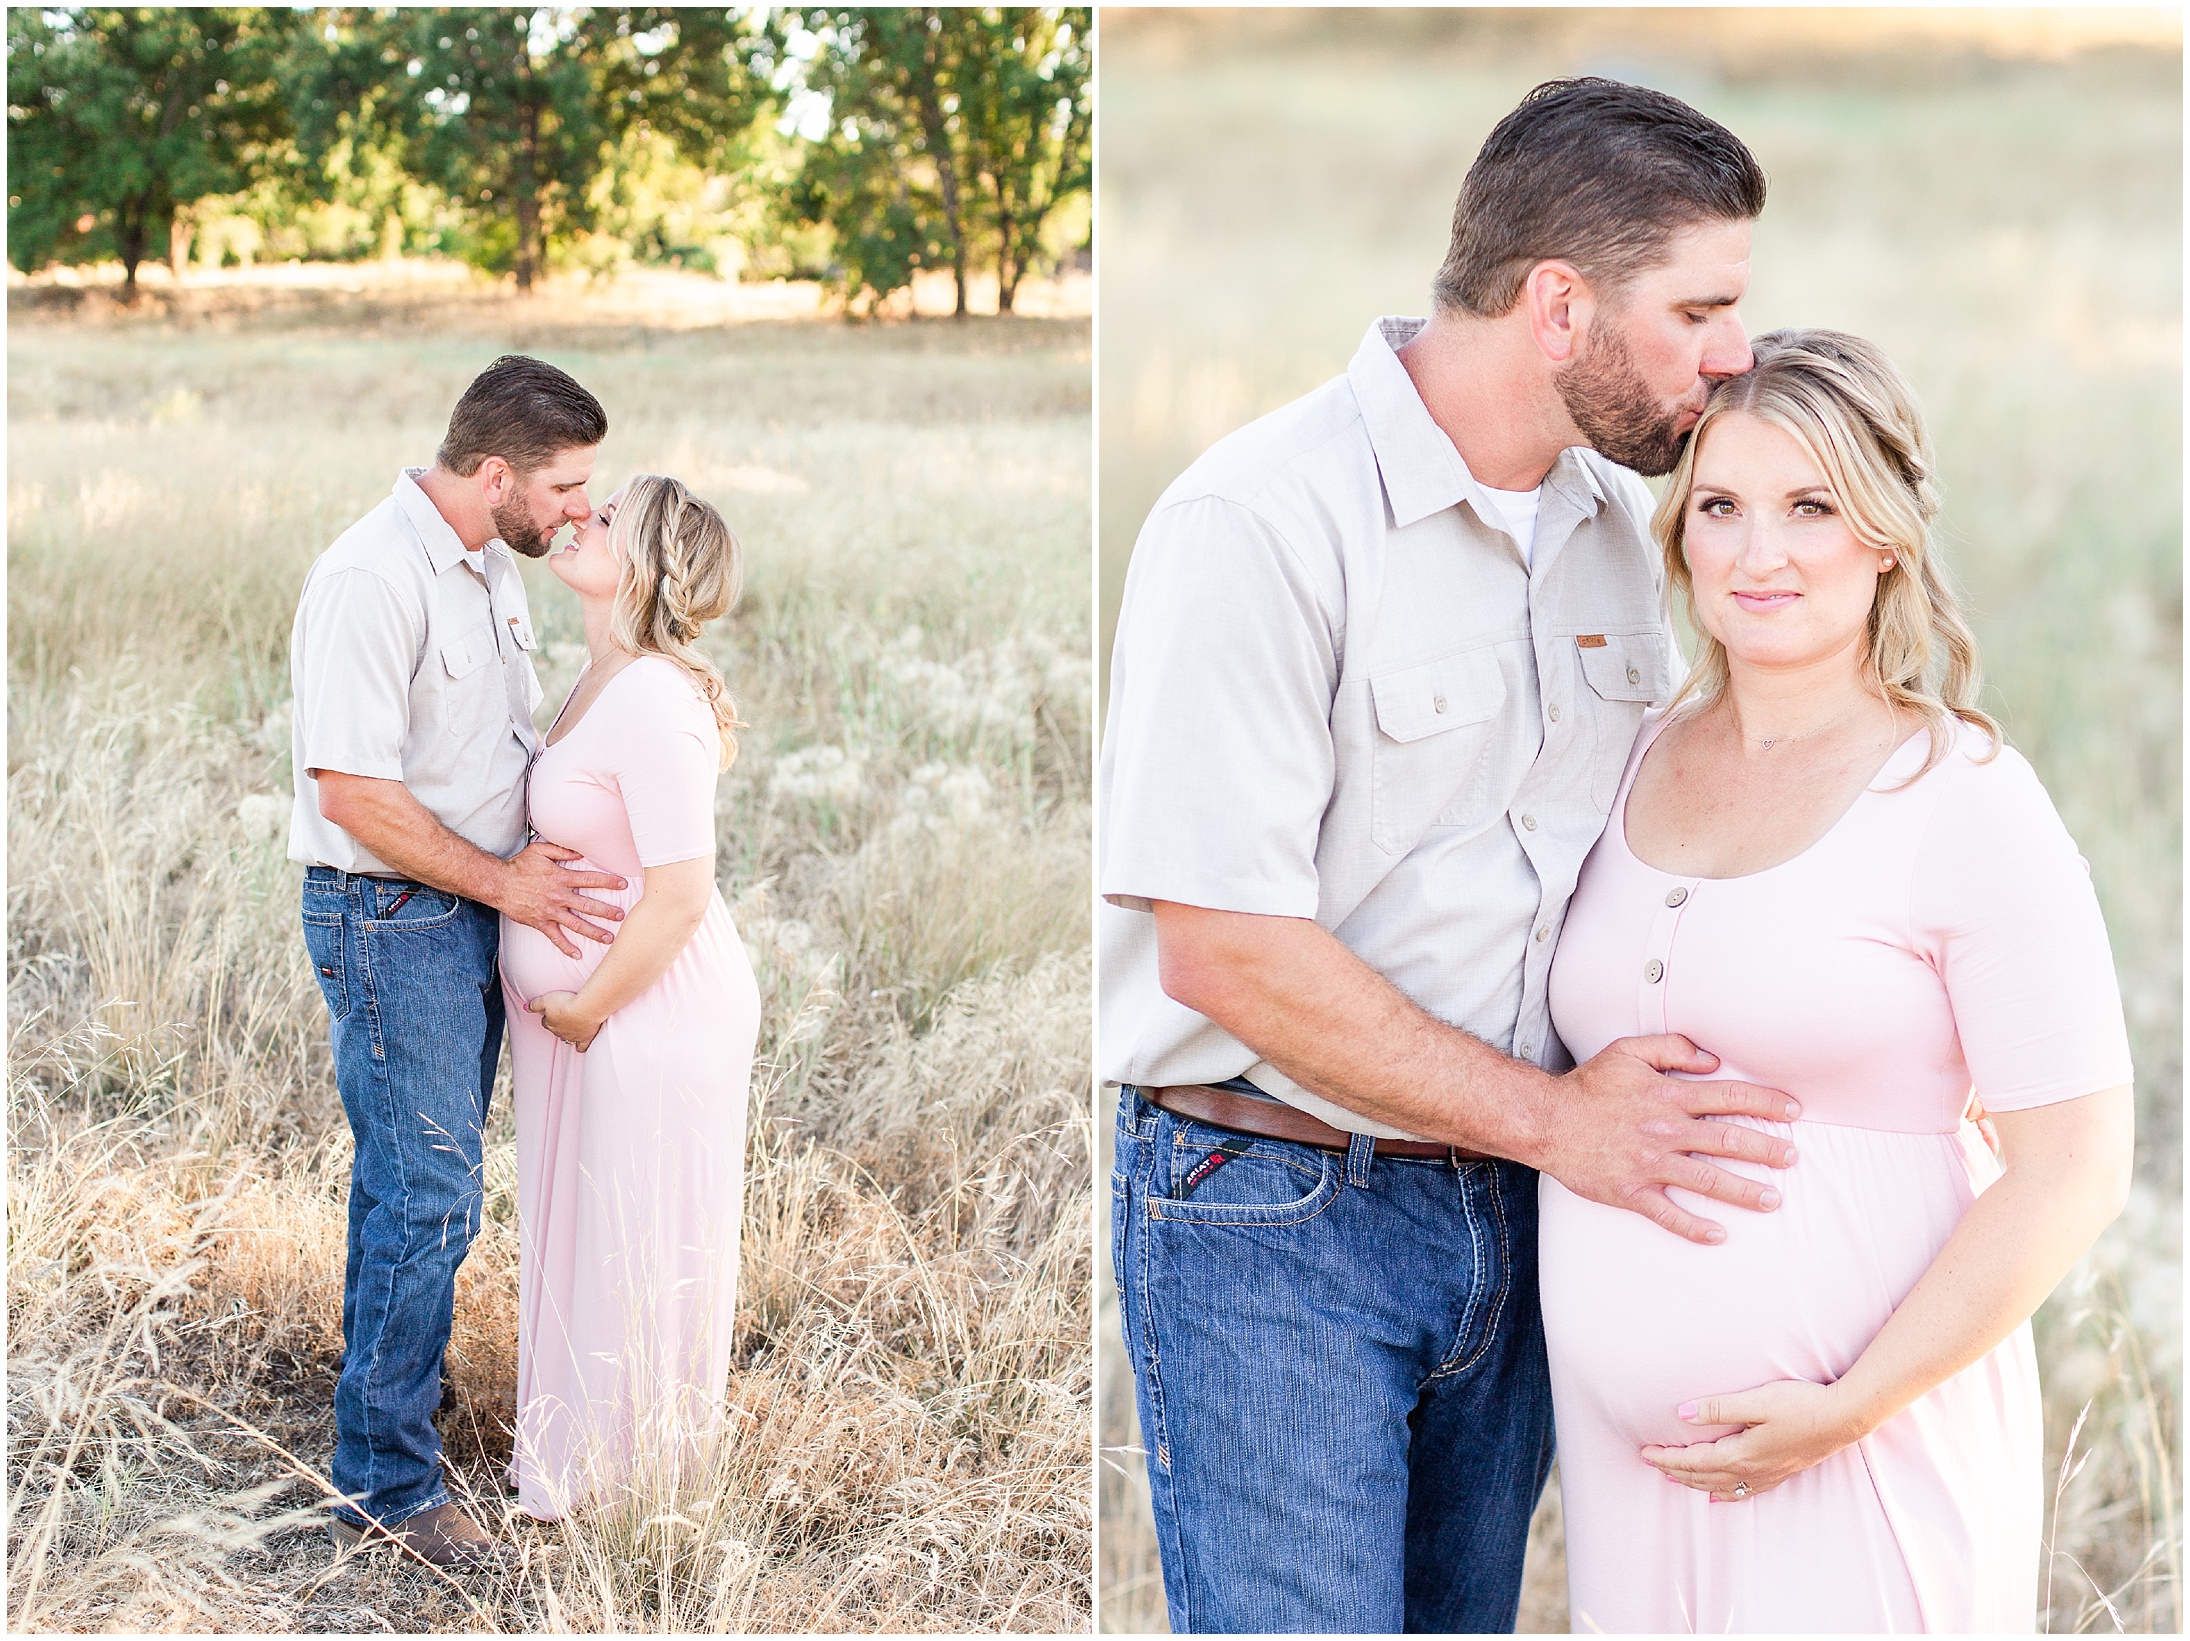 Romantic Sunset Maternity Session in Tall Grass,